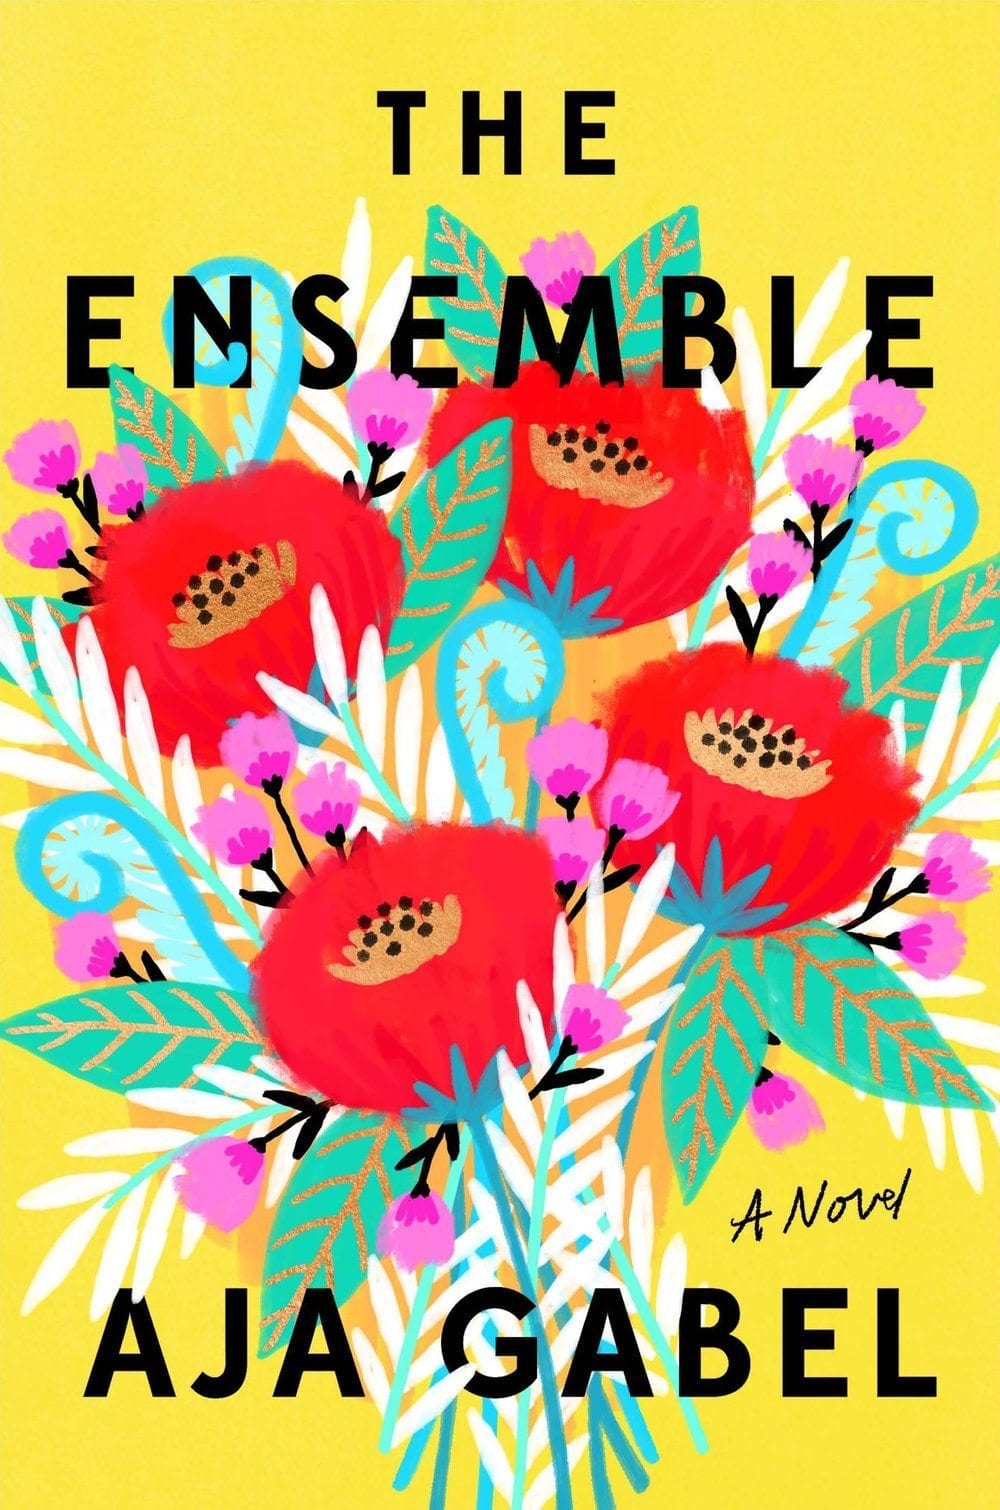 The Ensemble by Aja Gabel out in May